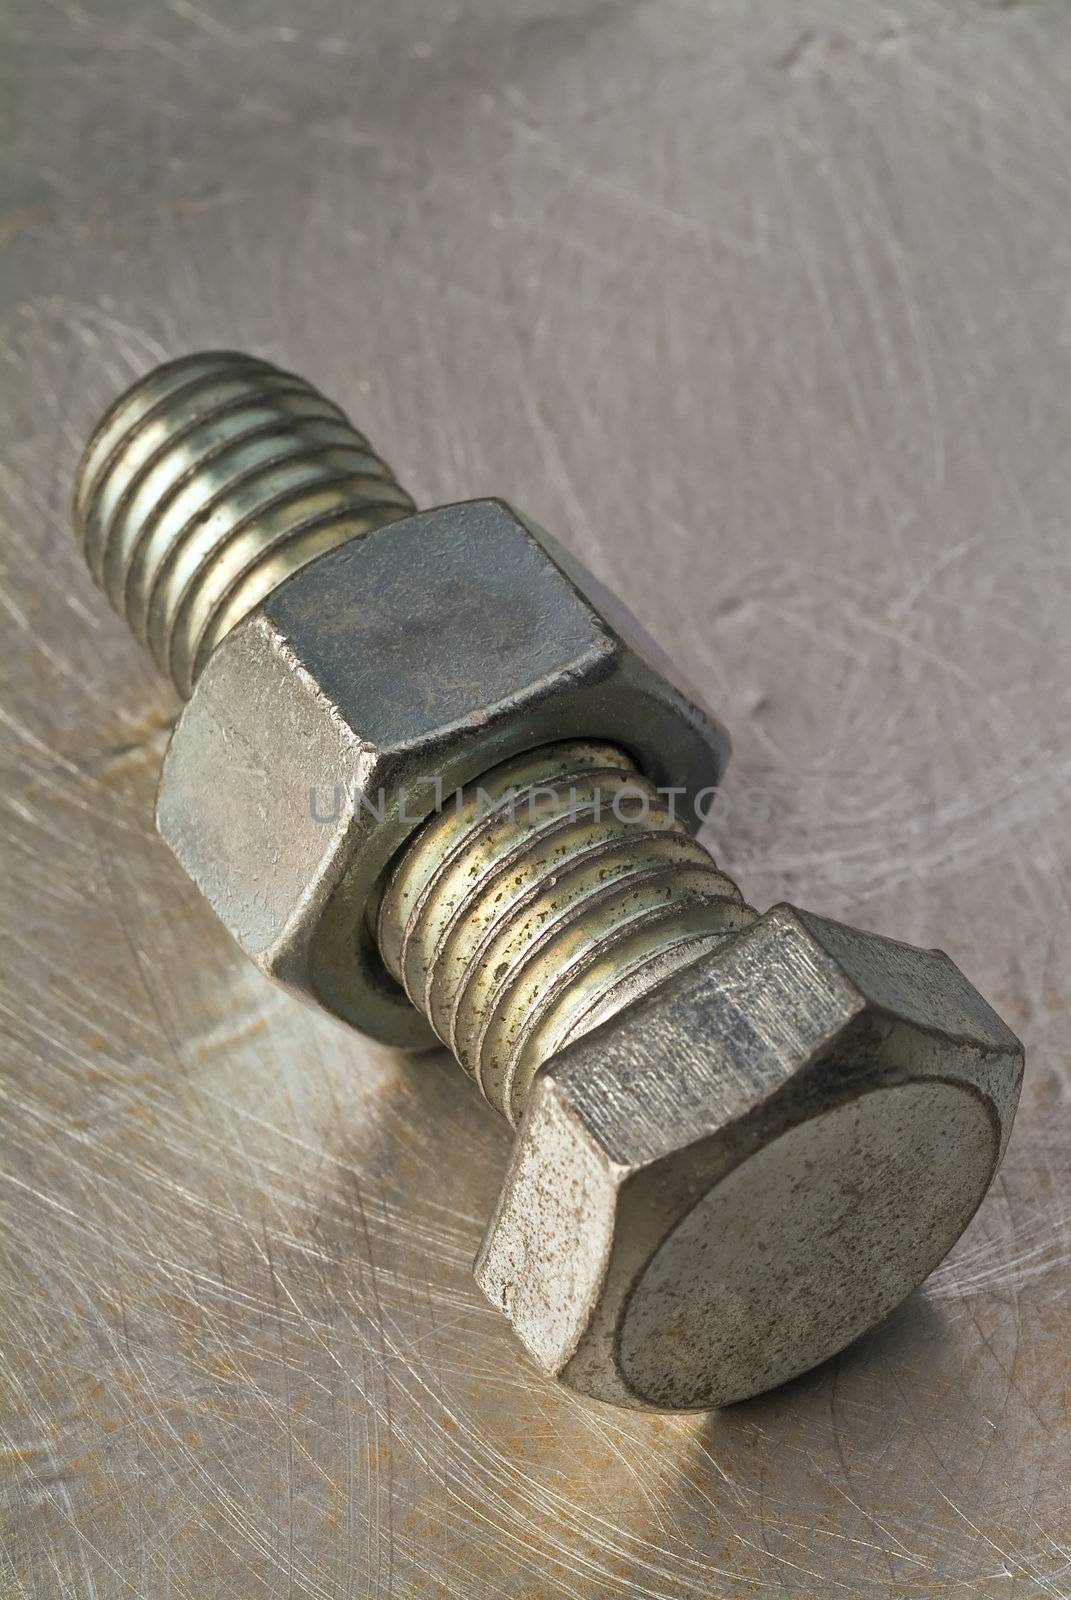 bolt and nut by noam